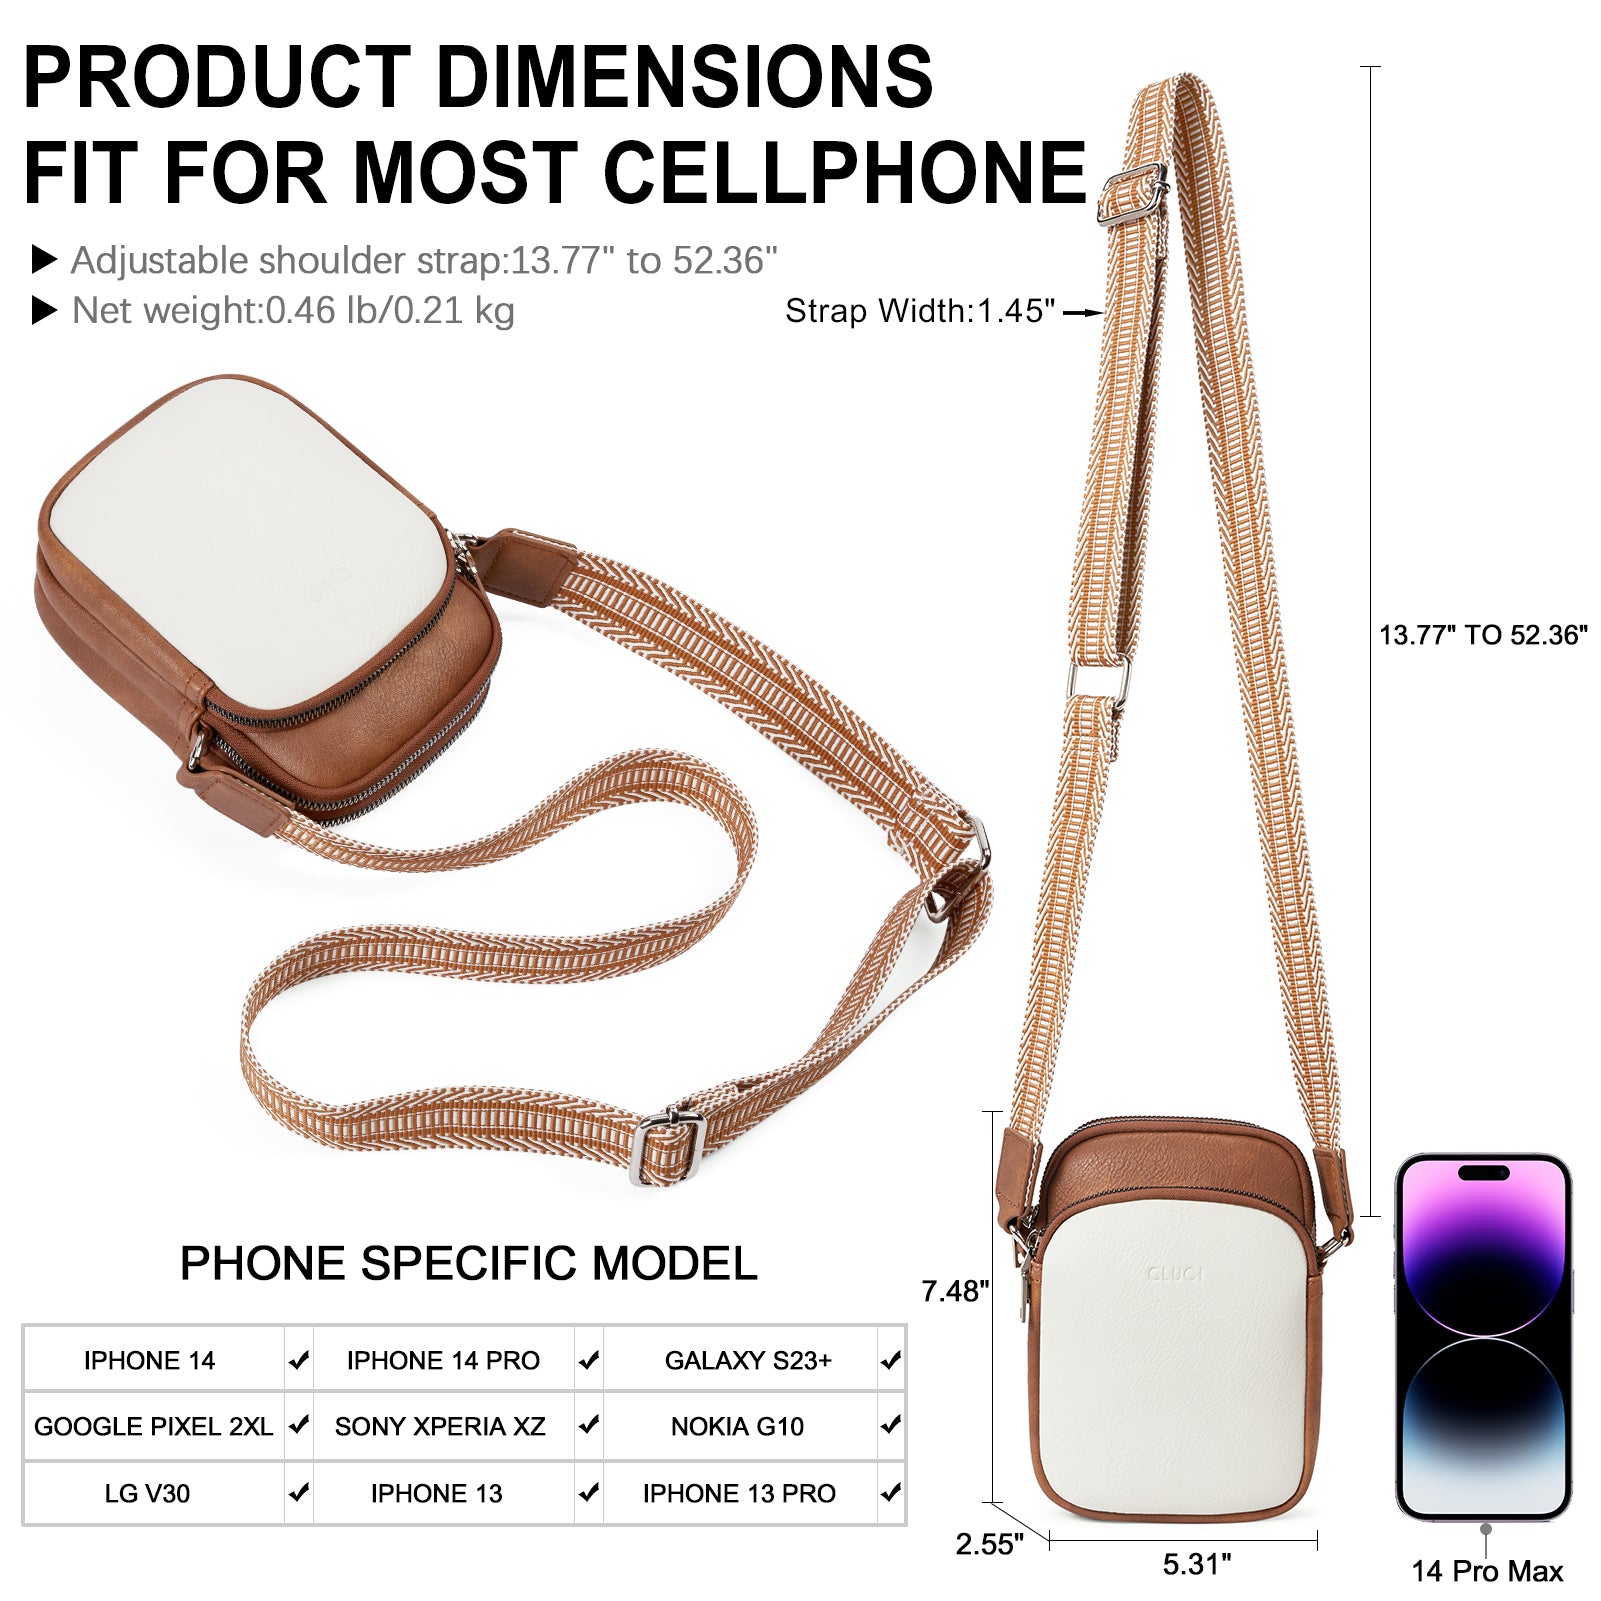 CLUCI Crossbody Bags for Women Small Vegan Leather Cell Phone Purse Shoulder Handbag Wallet with Adjustable Guitar Strap